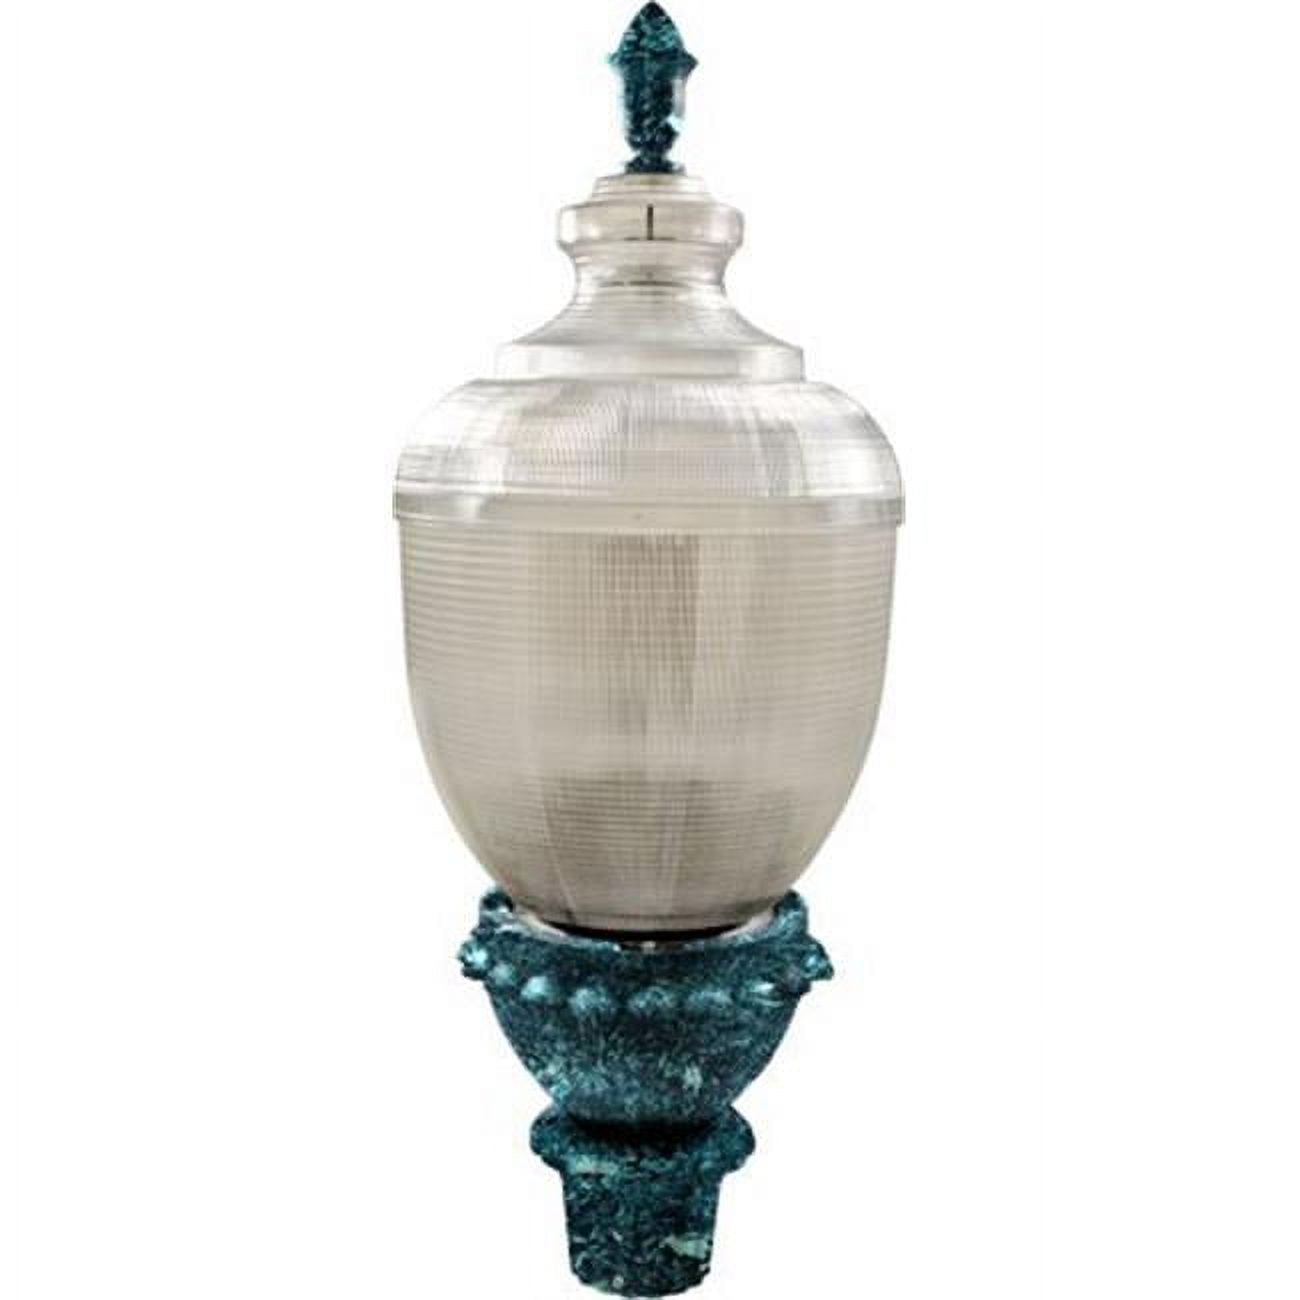 150 Watt High Pressure Sodium Mogul Base Multi-tap Clear Acorn Post Top Fixture With Ul Listed Wire & Cable, Black, Bronze & Verde Green